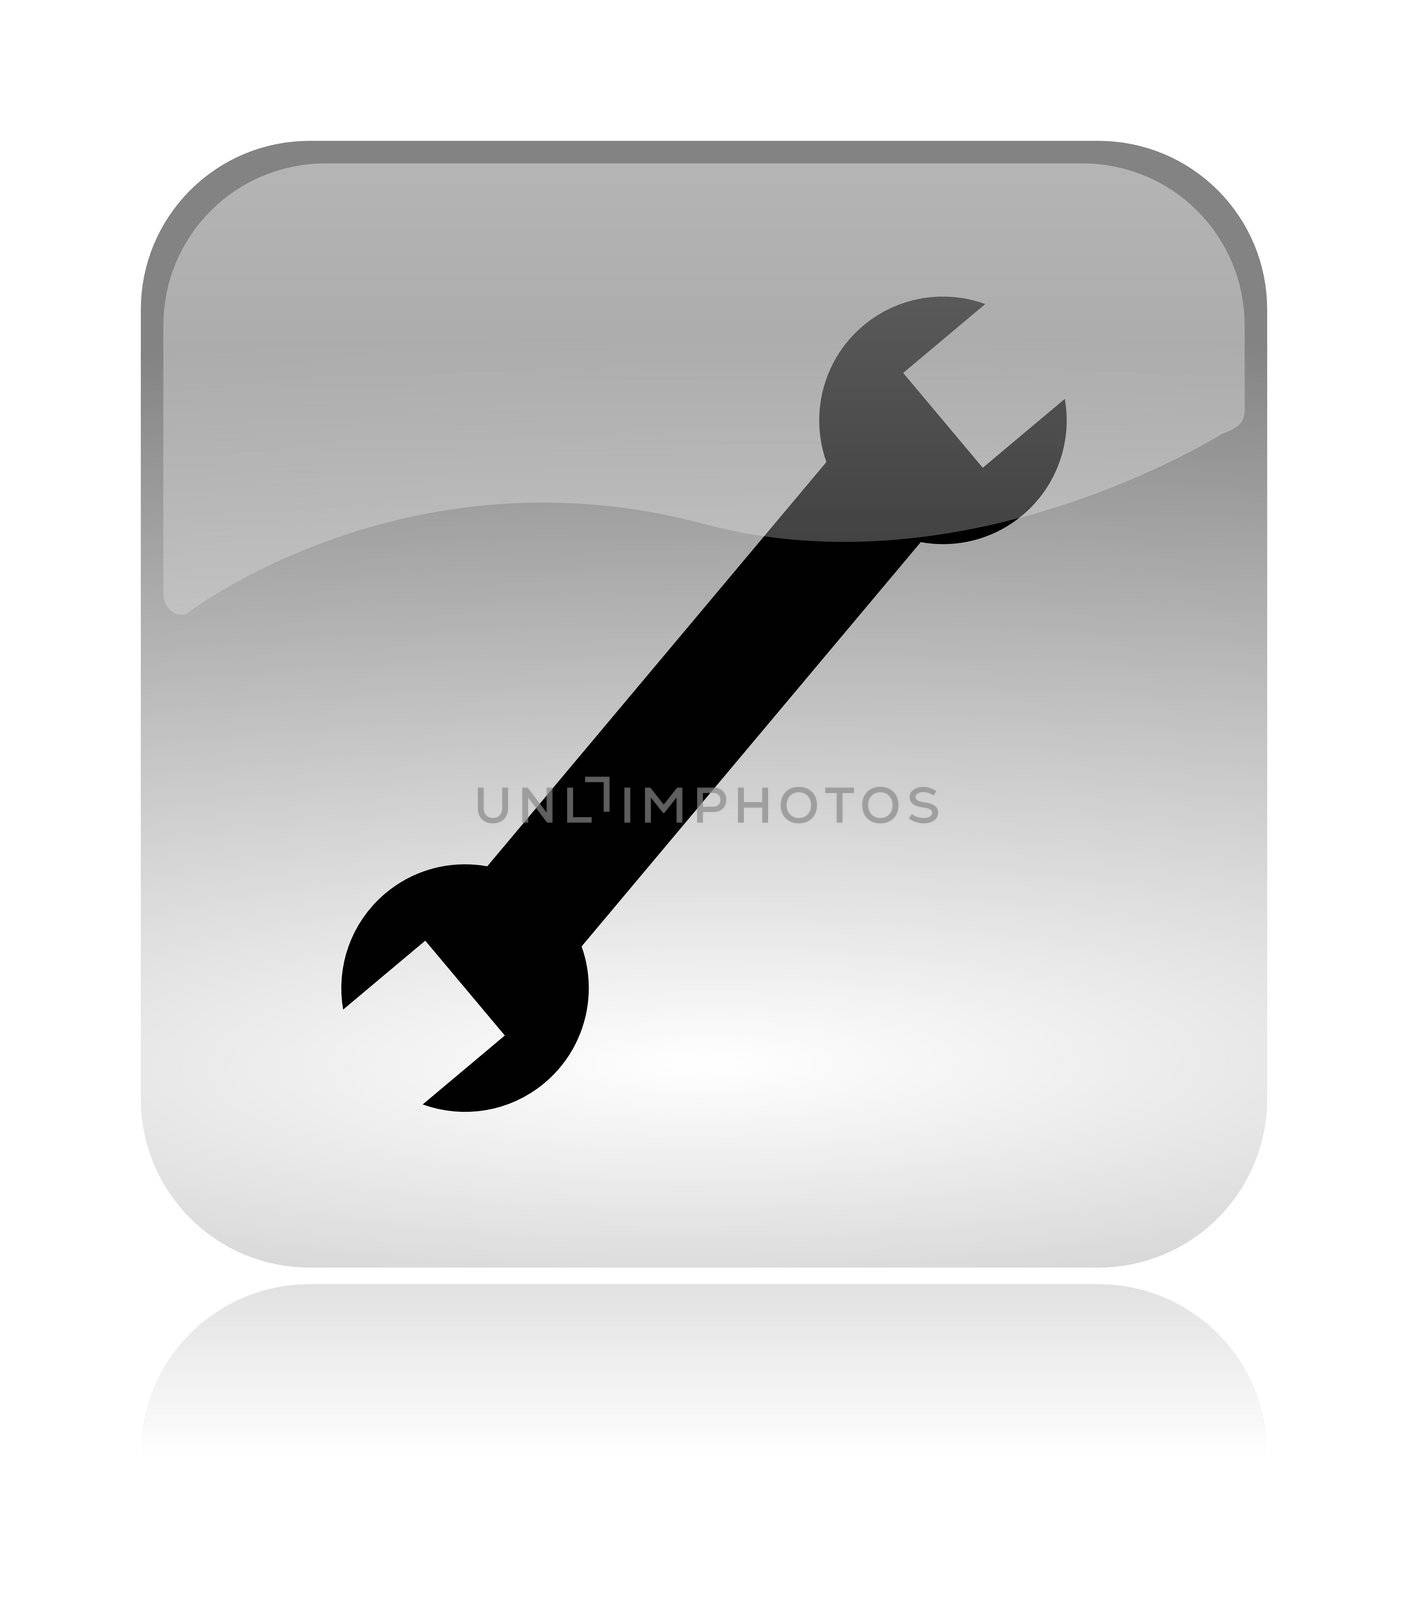 Wrench, settings, web interface icon by make